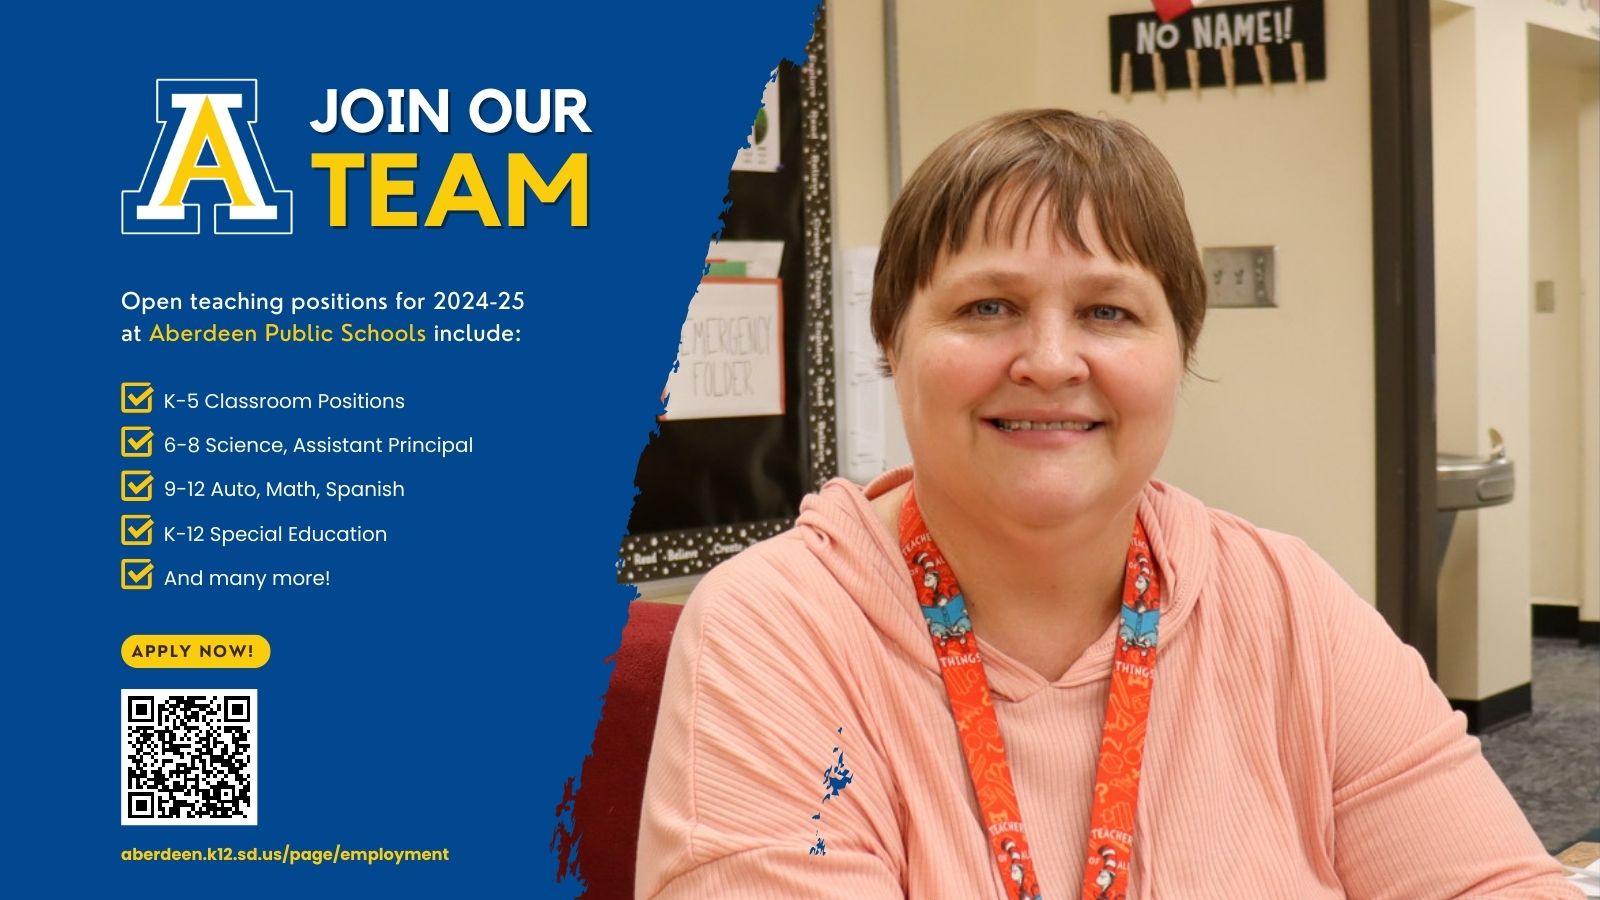 Join our team graphic with photo of teacher and teaching openings